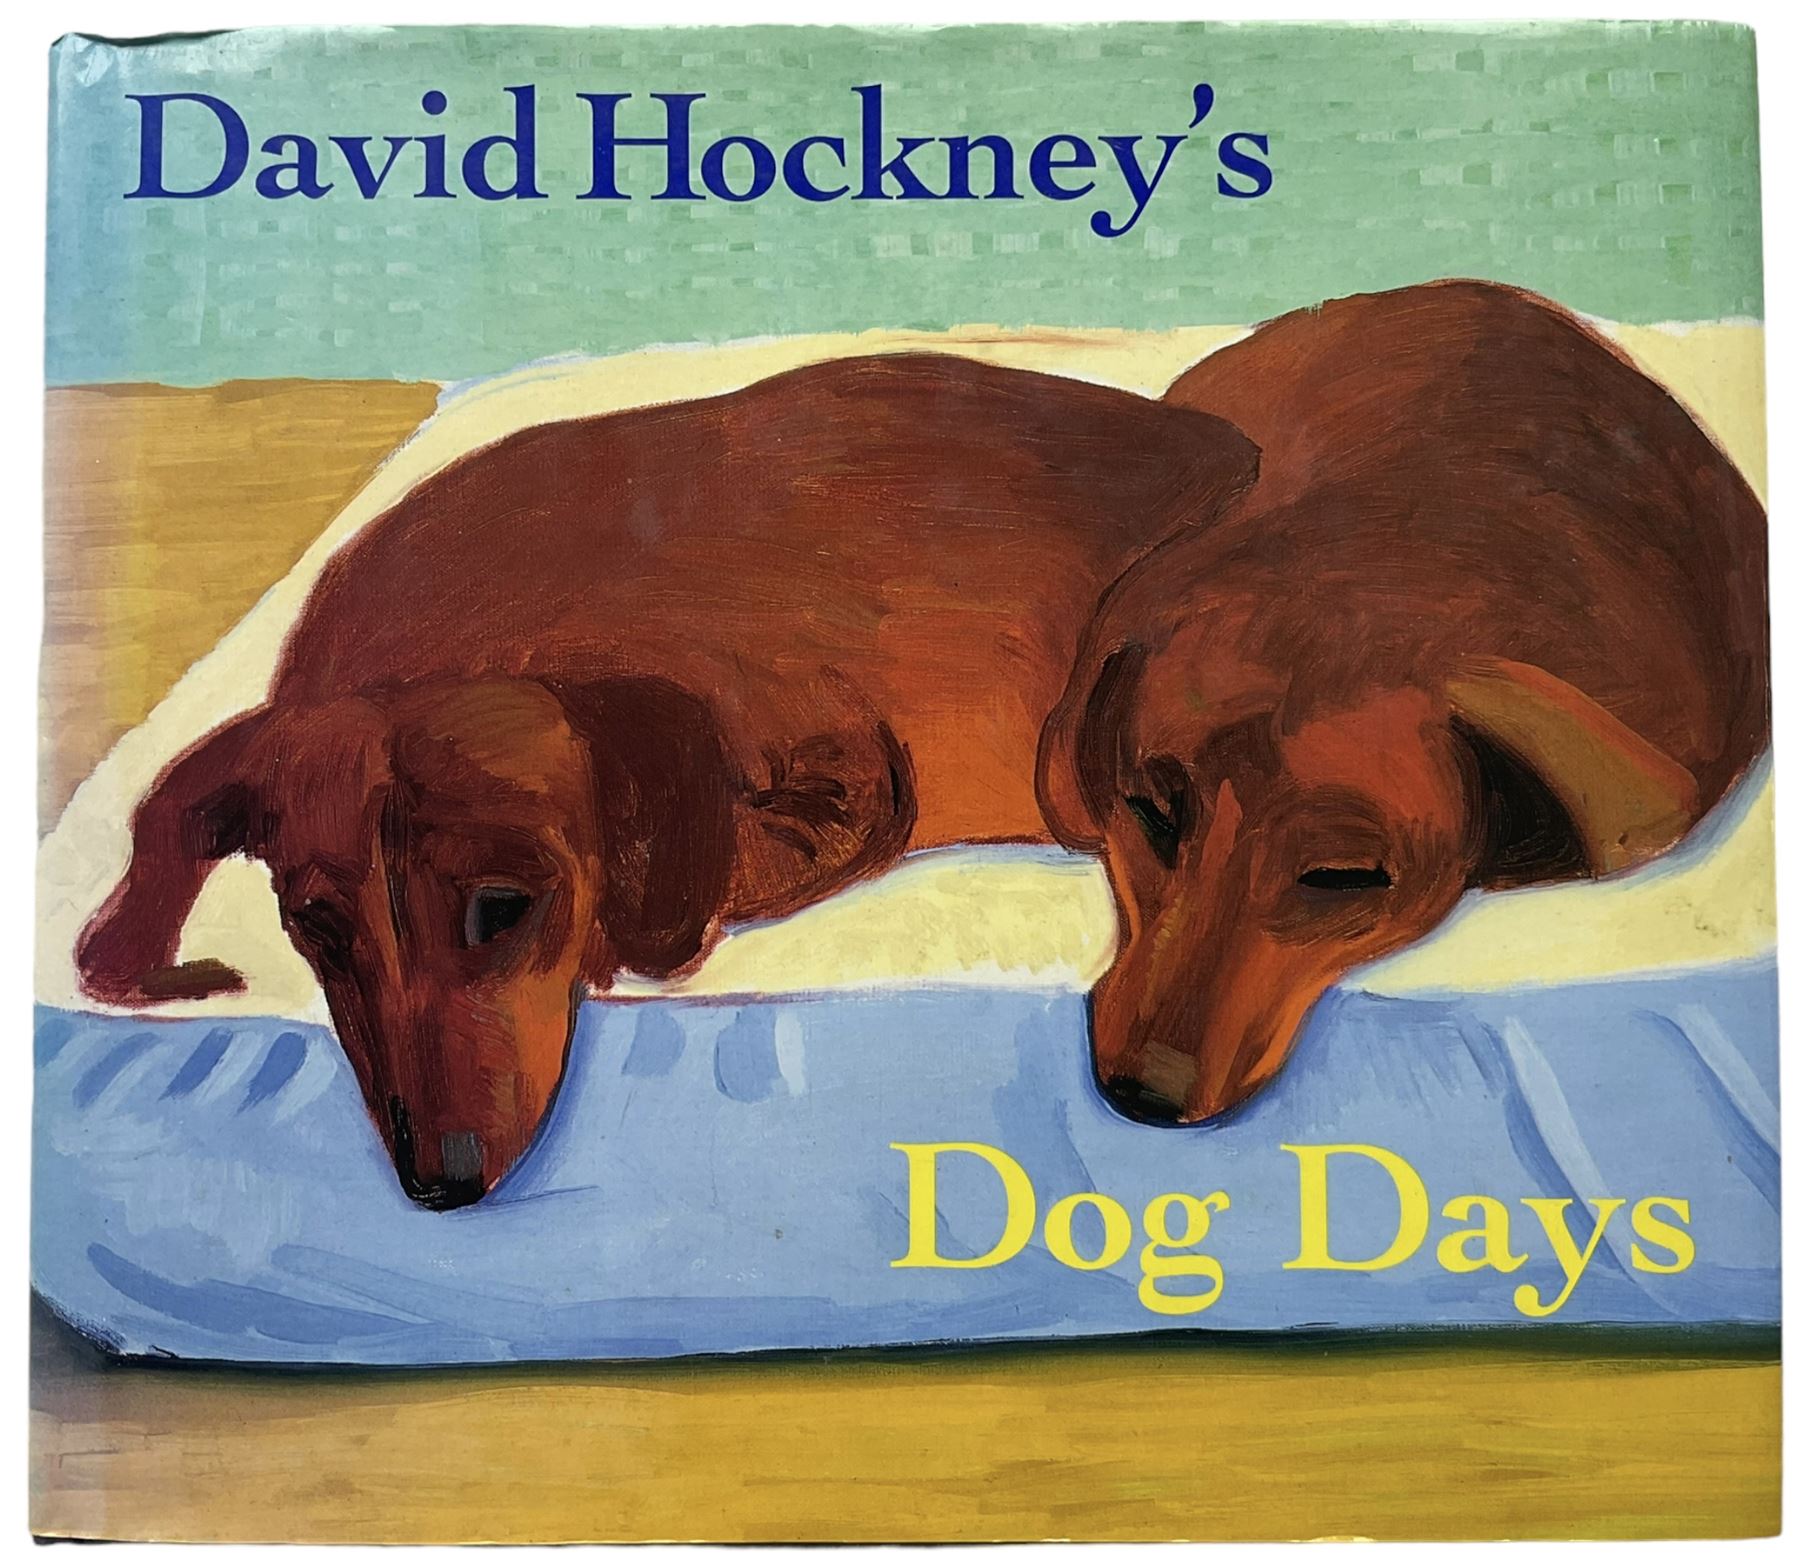 David Hockney (British 1937-) - 'My Yorkshire - Conversations with Marco Livingstone' and 'Dog Days' - Image 2 of 9